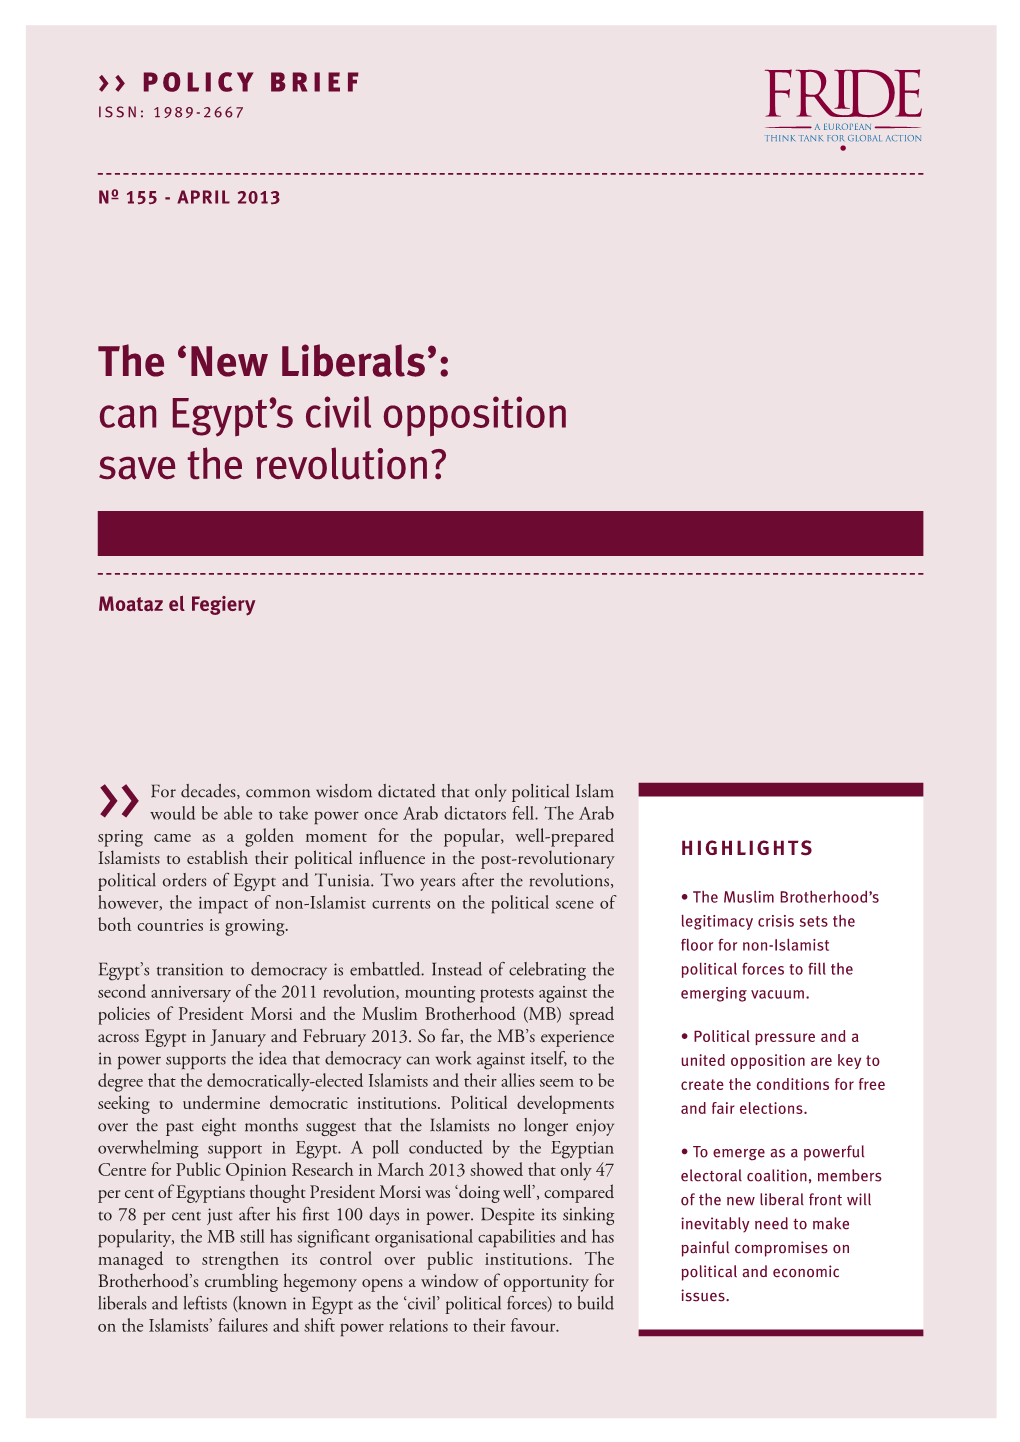 The 'New Liberals': Can Egypt's Civil Opposition Save the Revolution?